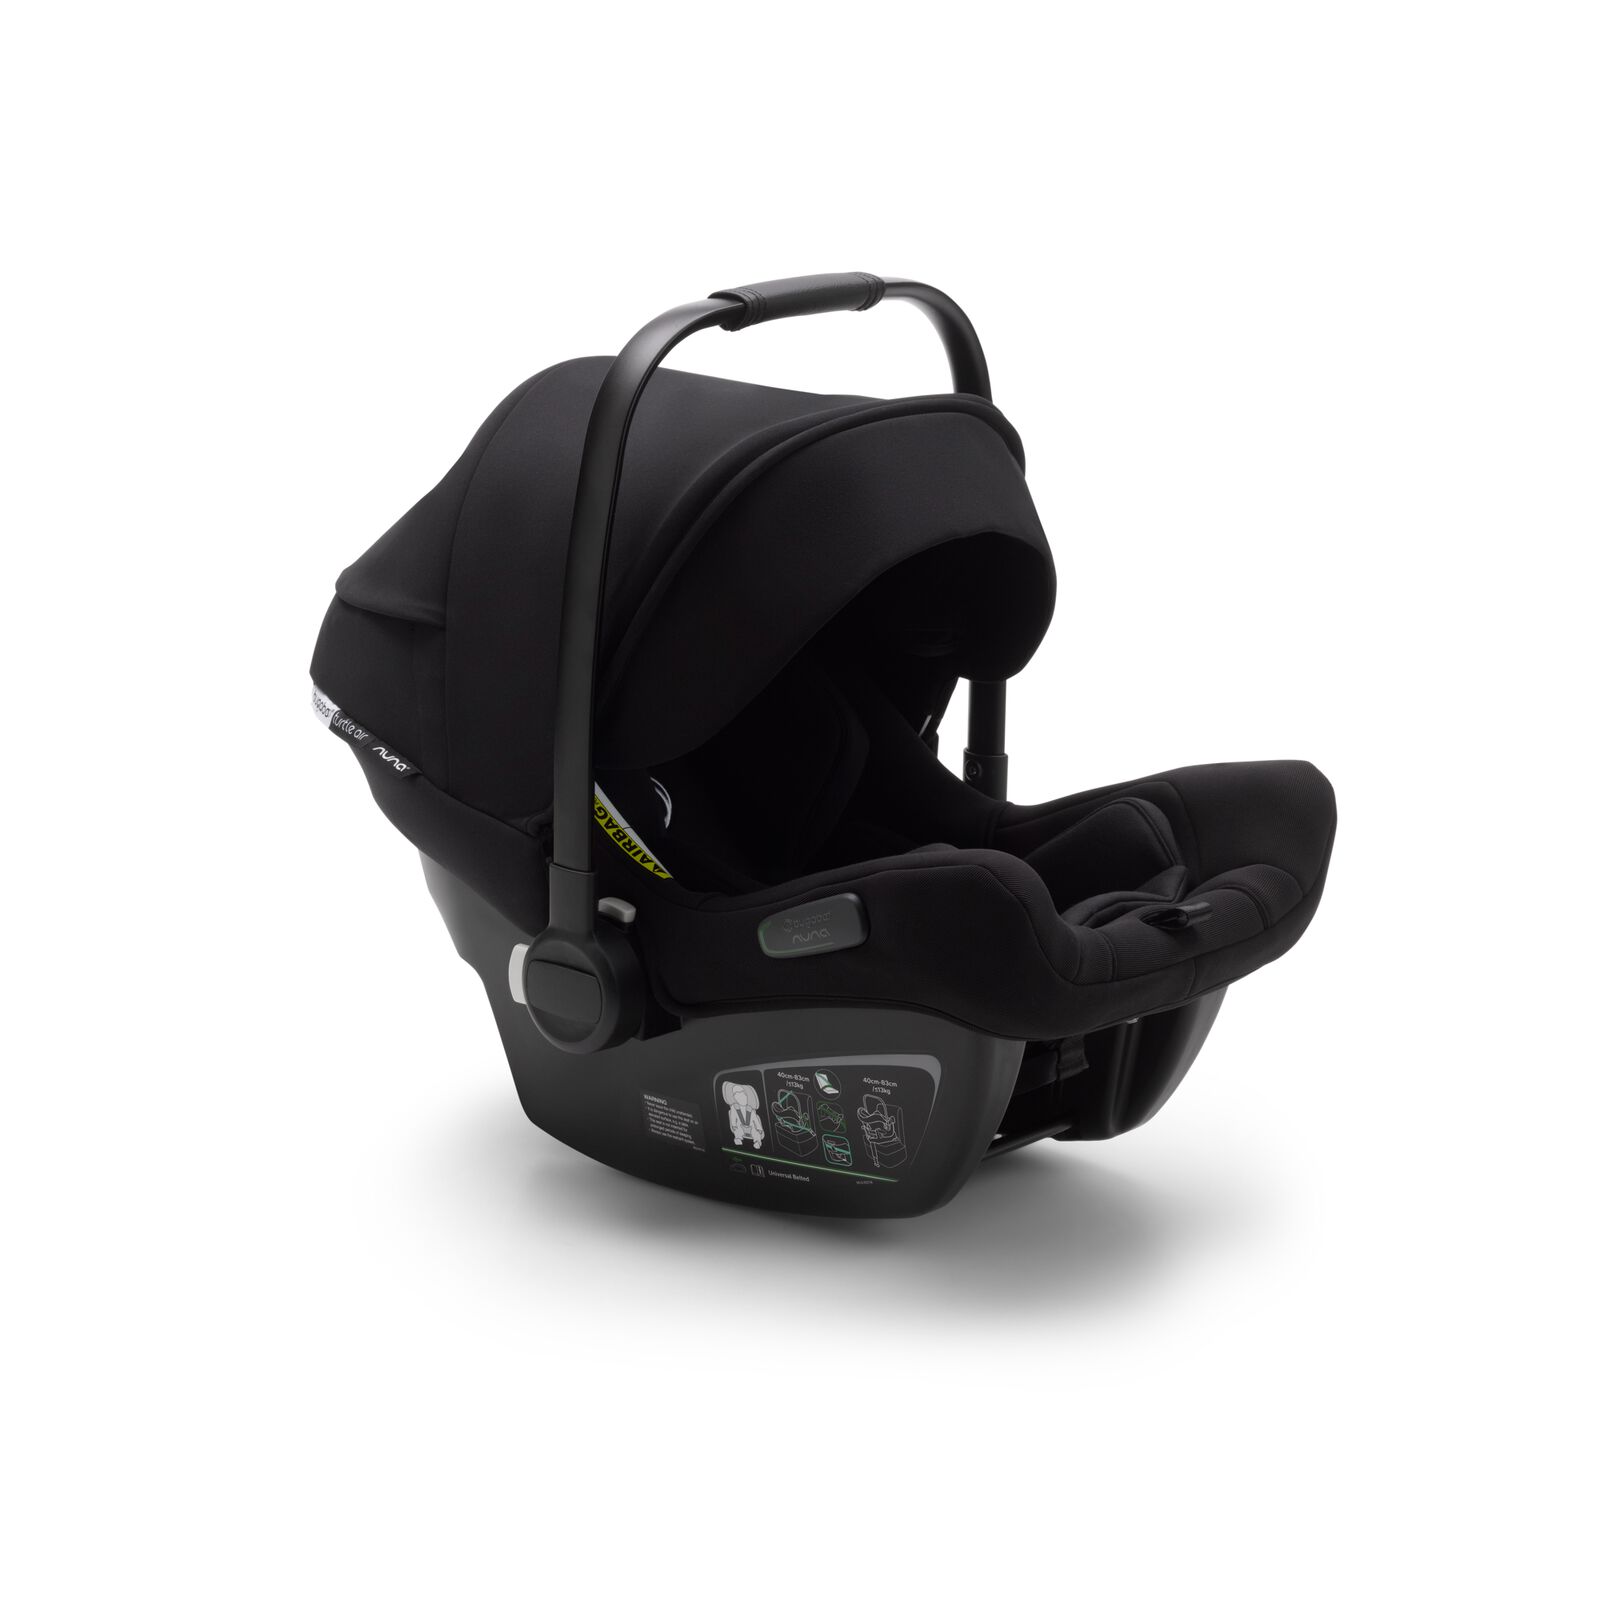 Bugaboo Donkey 3 Twin travel system - View 3